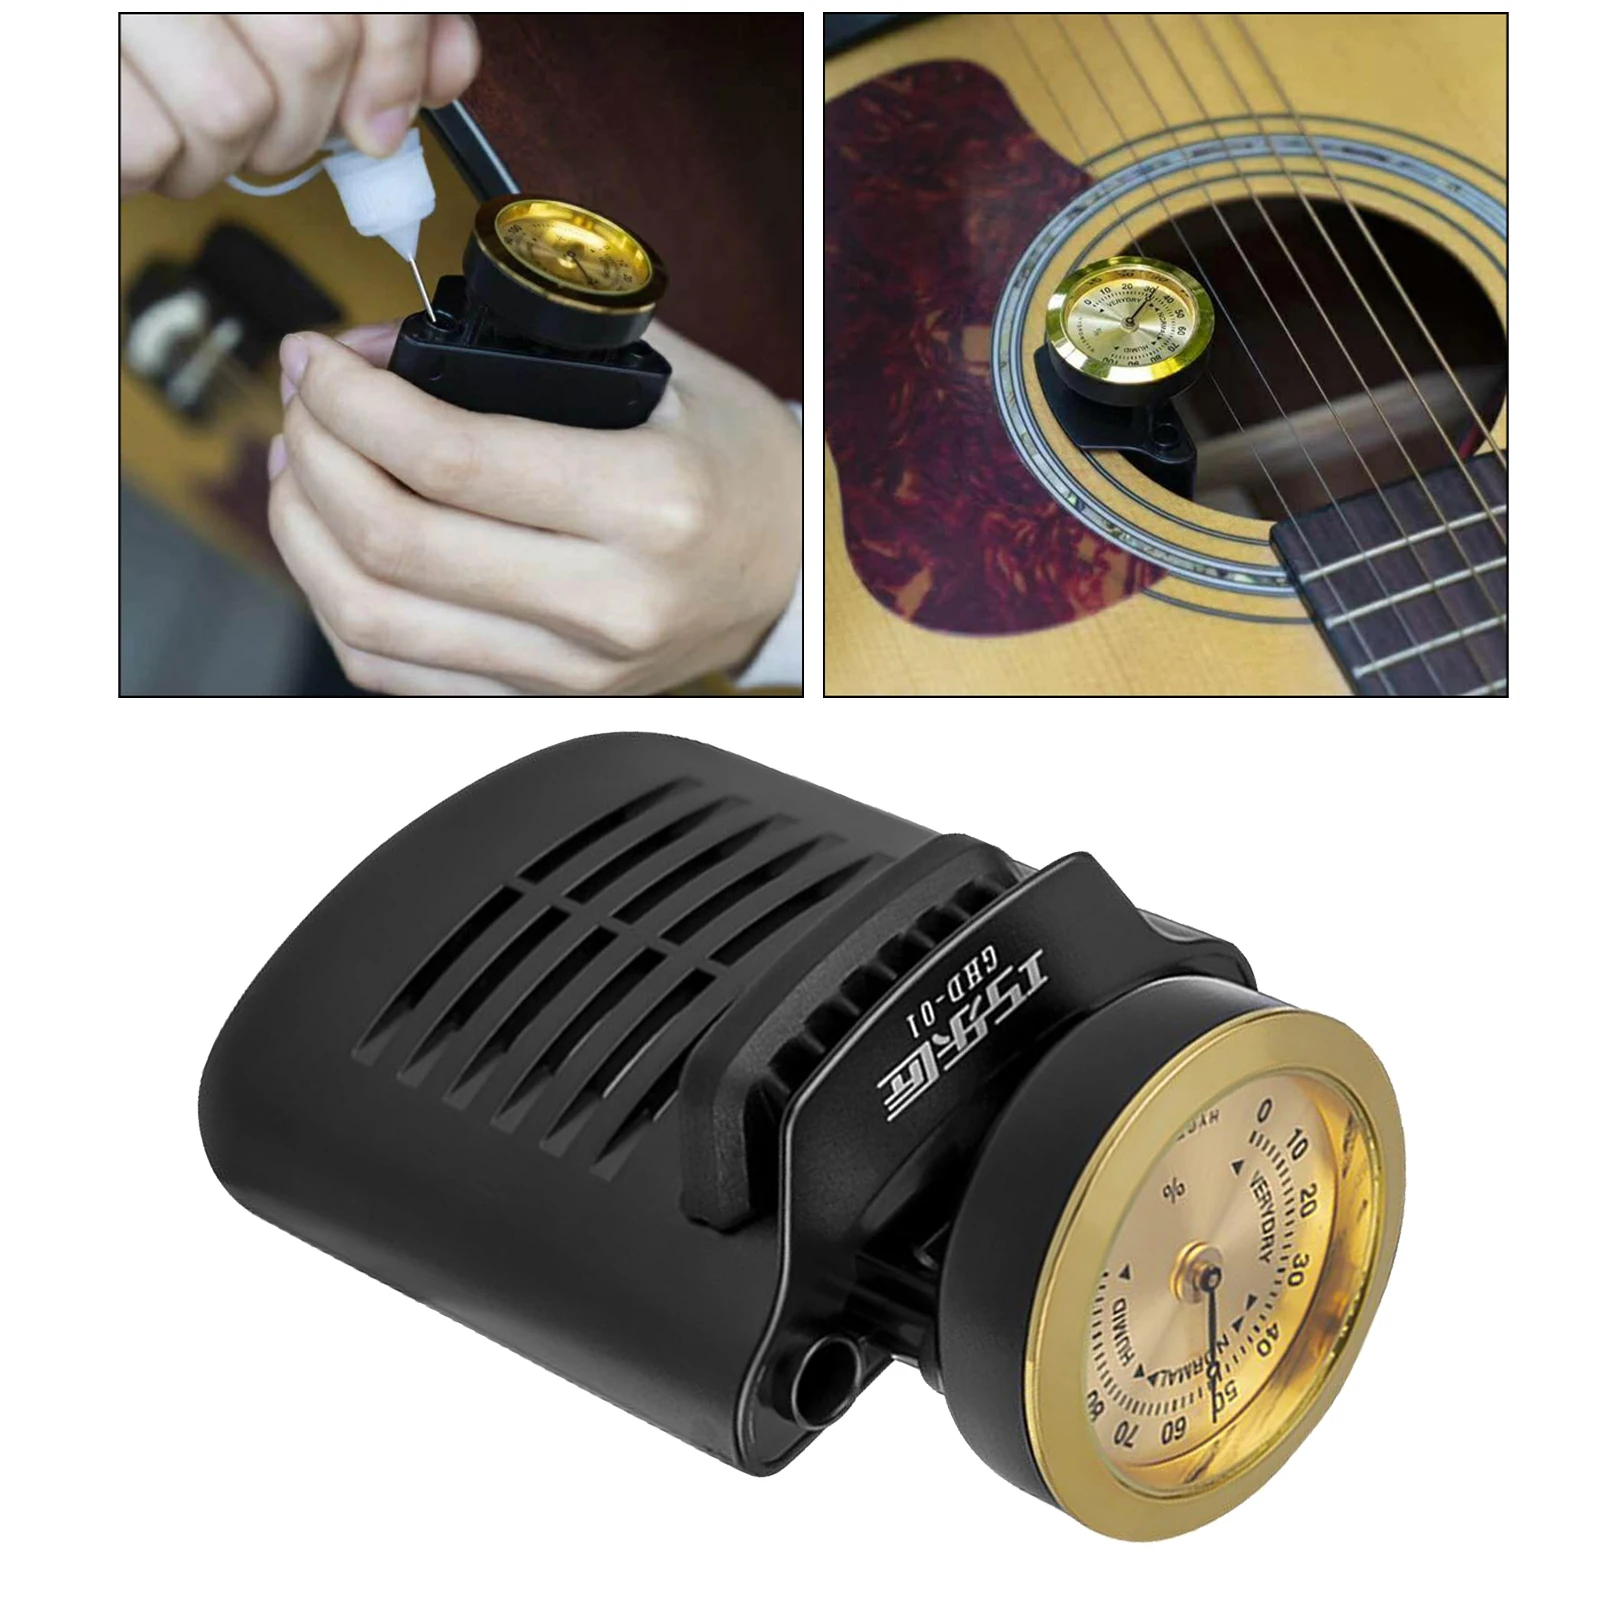 

Guitar Humidifier Professional Guitar Humidity Care System Hygrometer to Prevent Cracking